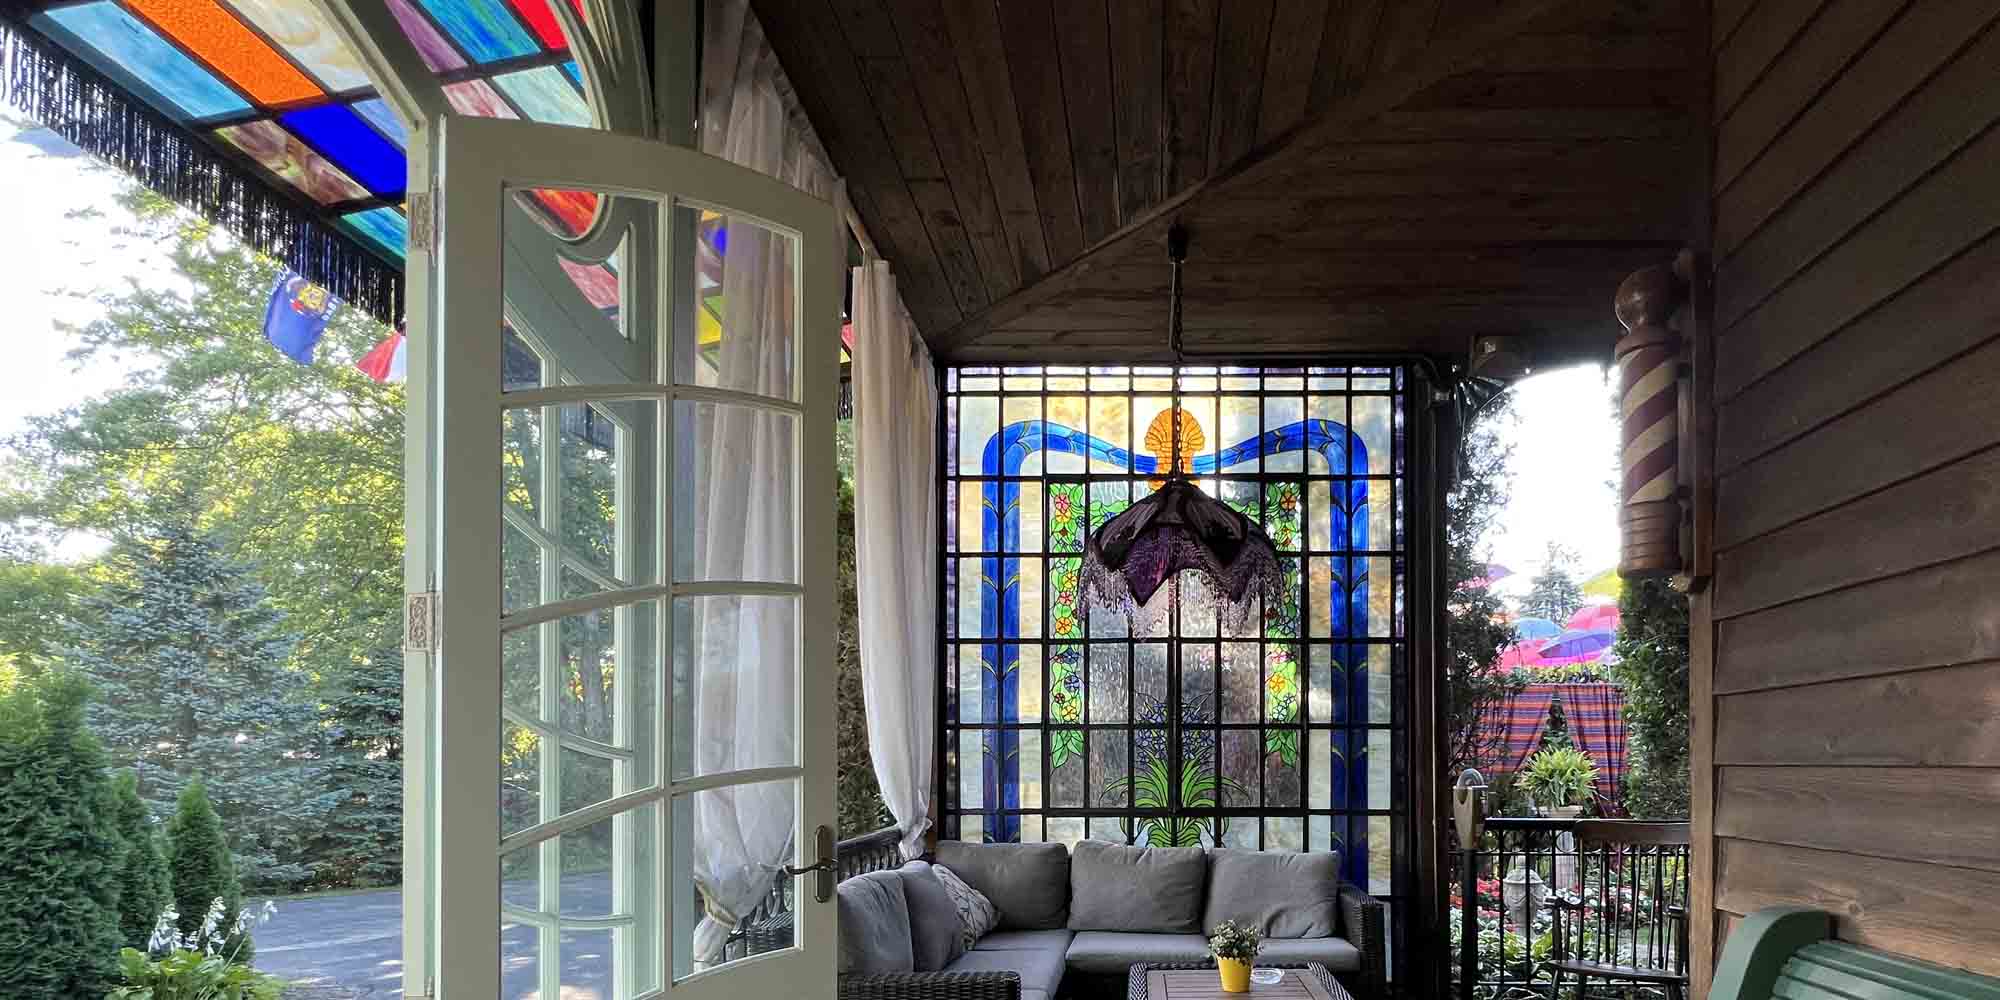 Adeline's House of Cool stained glass features